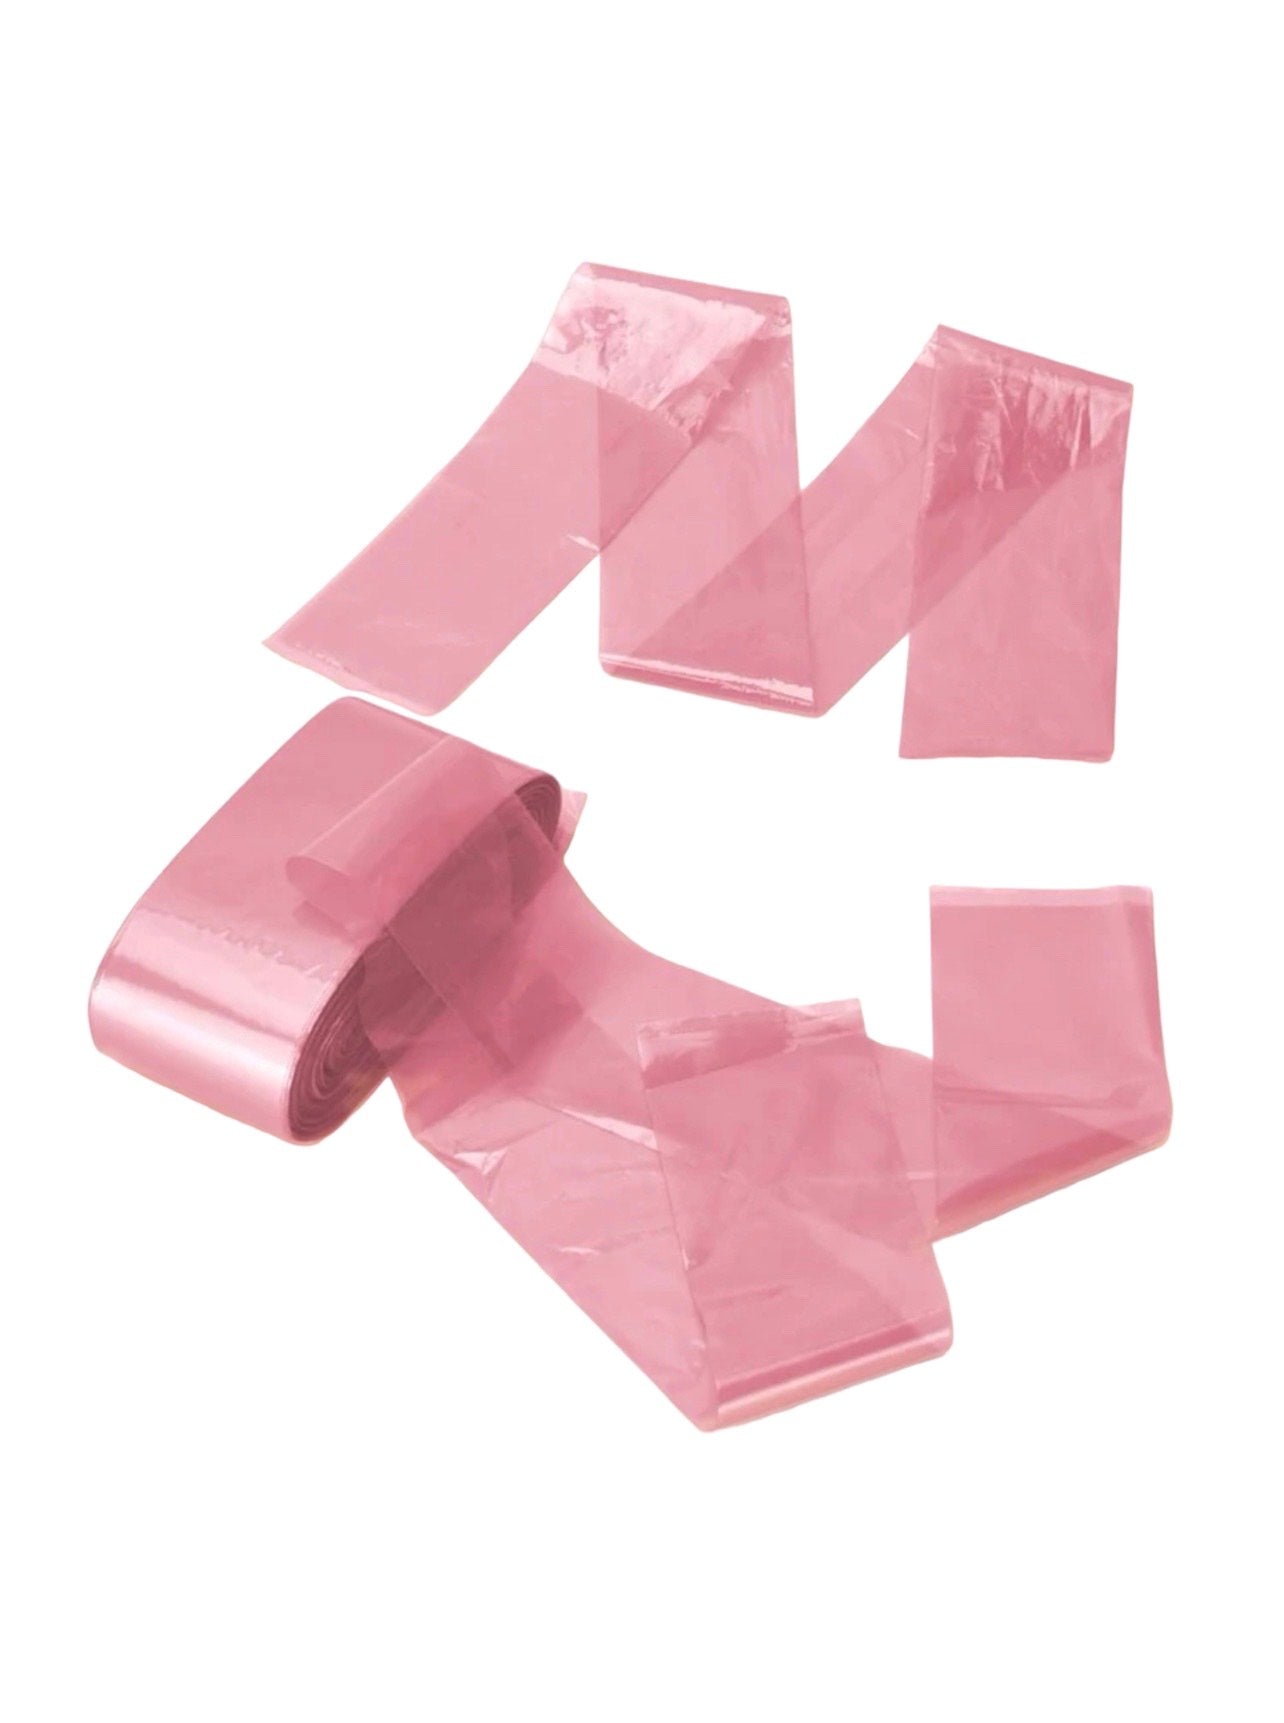 Tattoo/PMU Clip Cord Sleeves Pack of 100 Disposable Plastic Hygiene Machine Pink